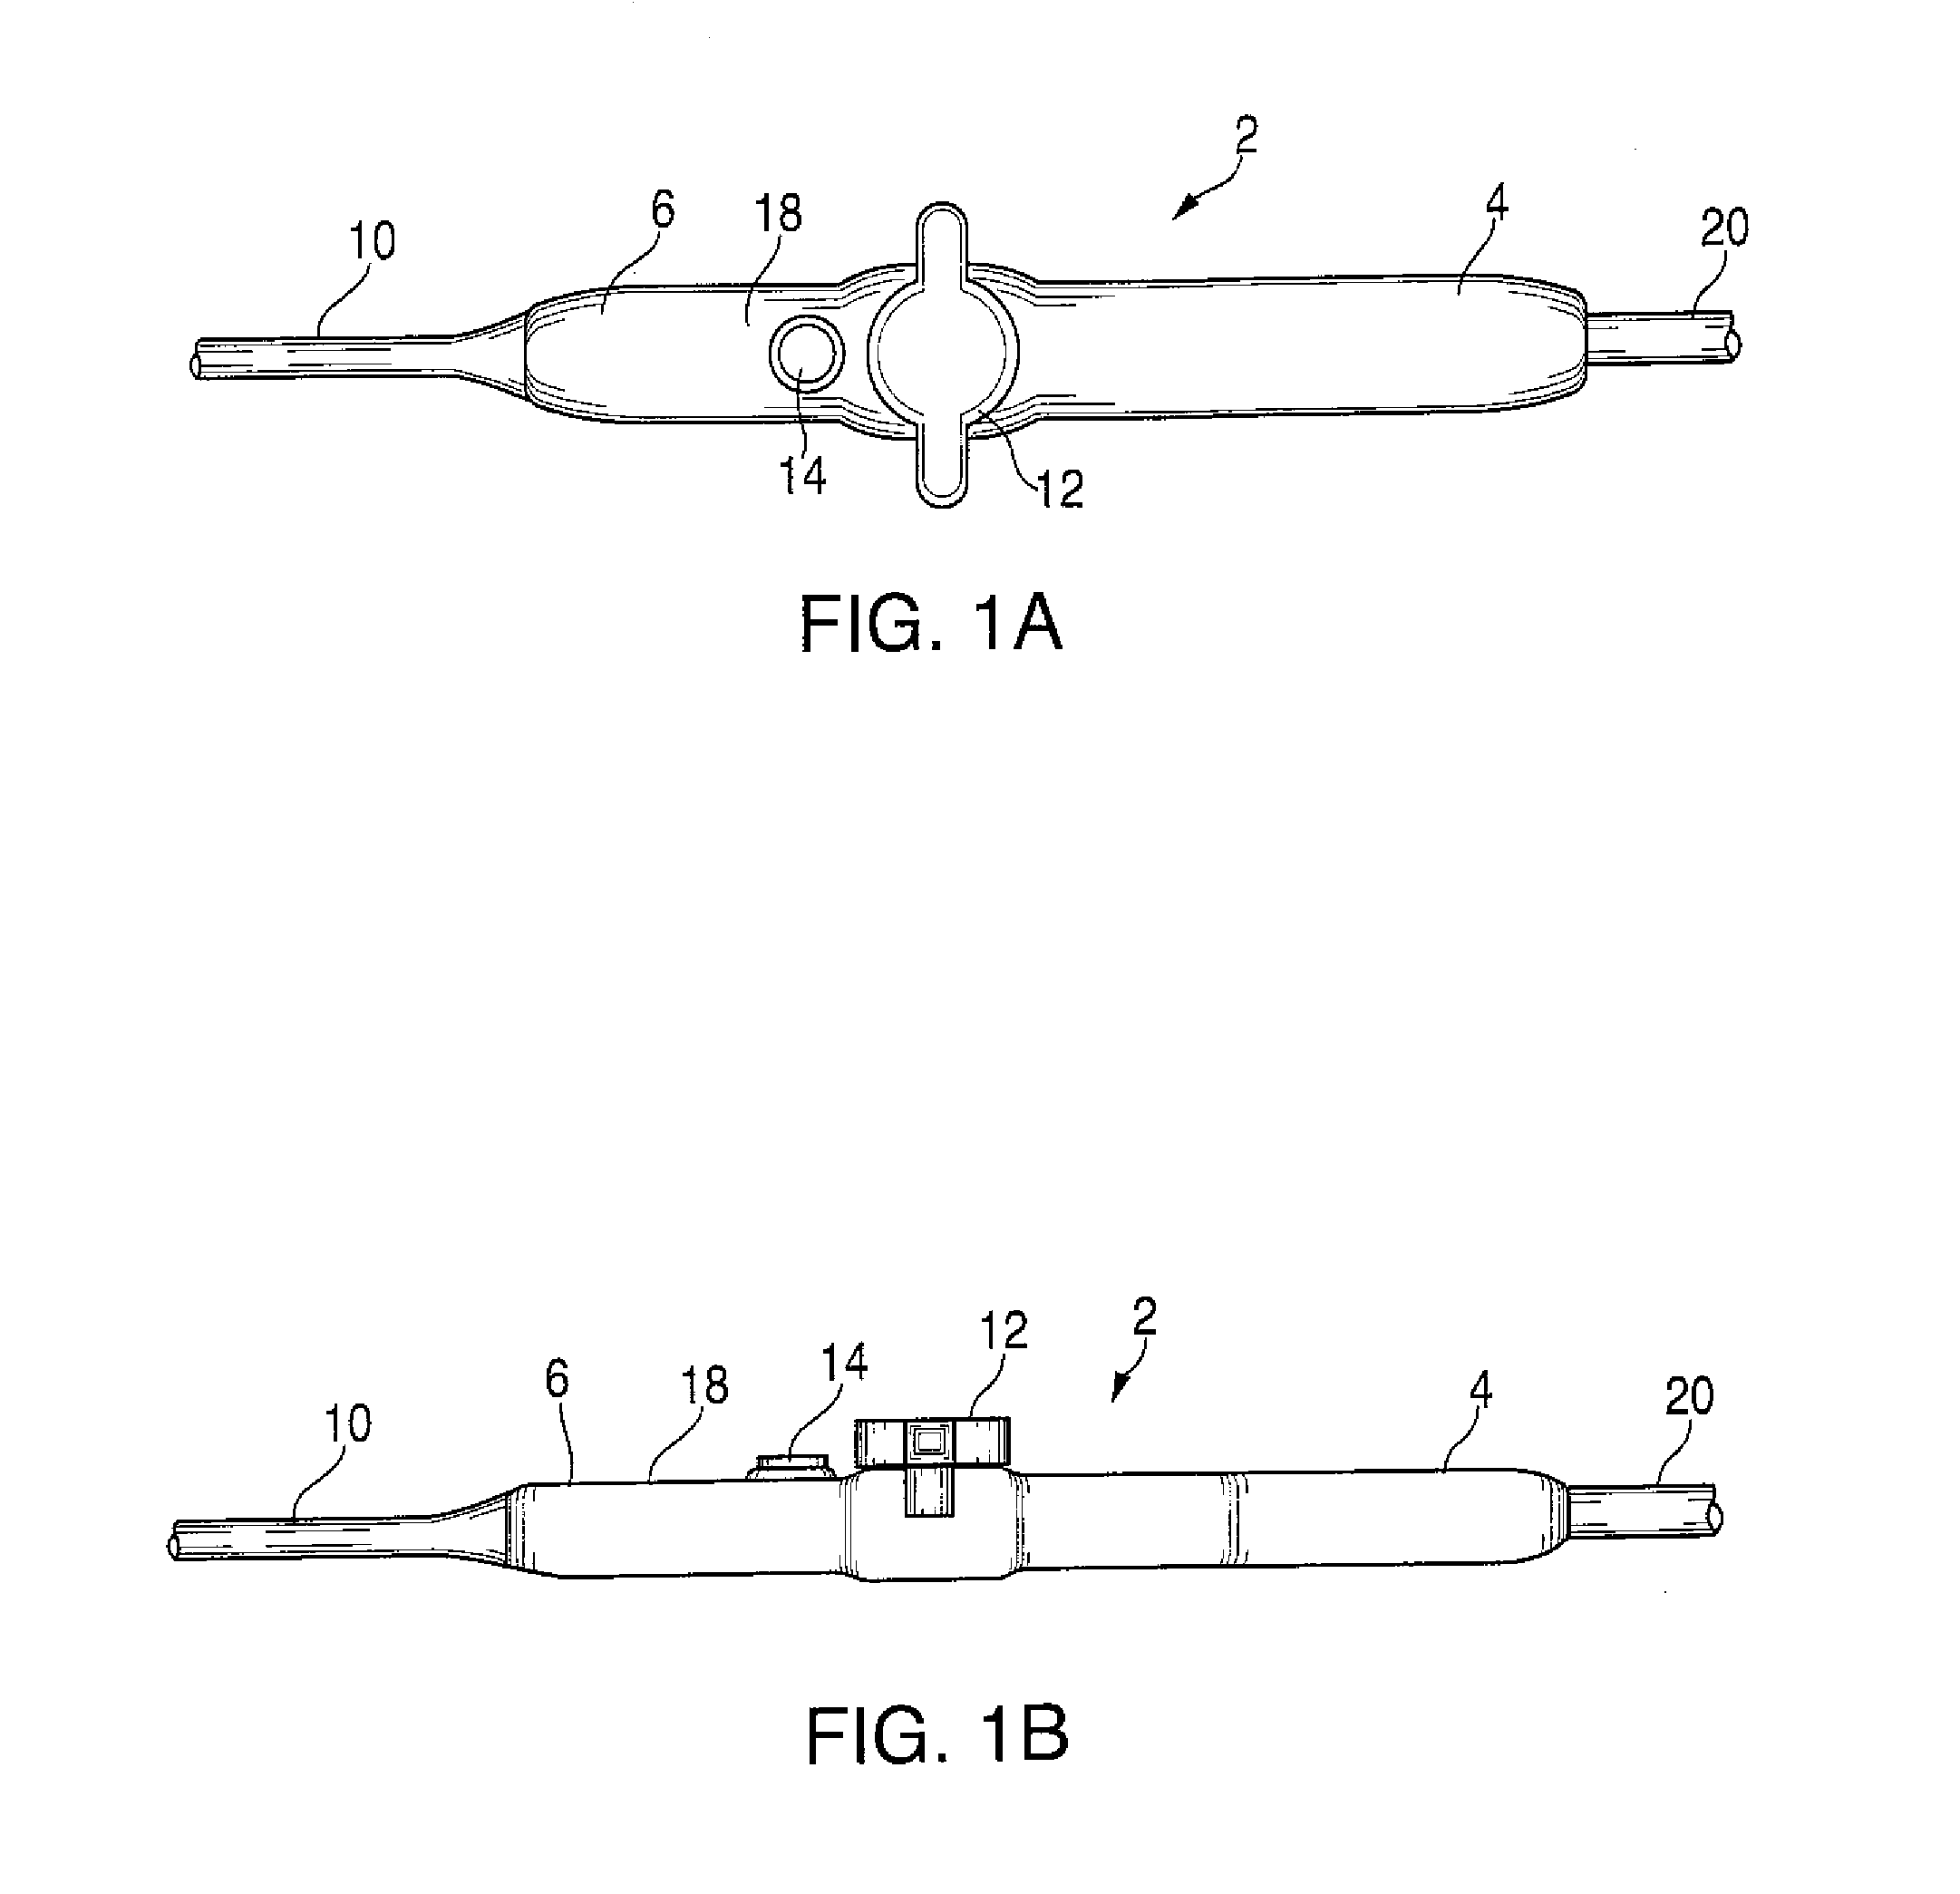 Ablation catheter system for preventing damage